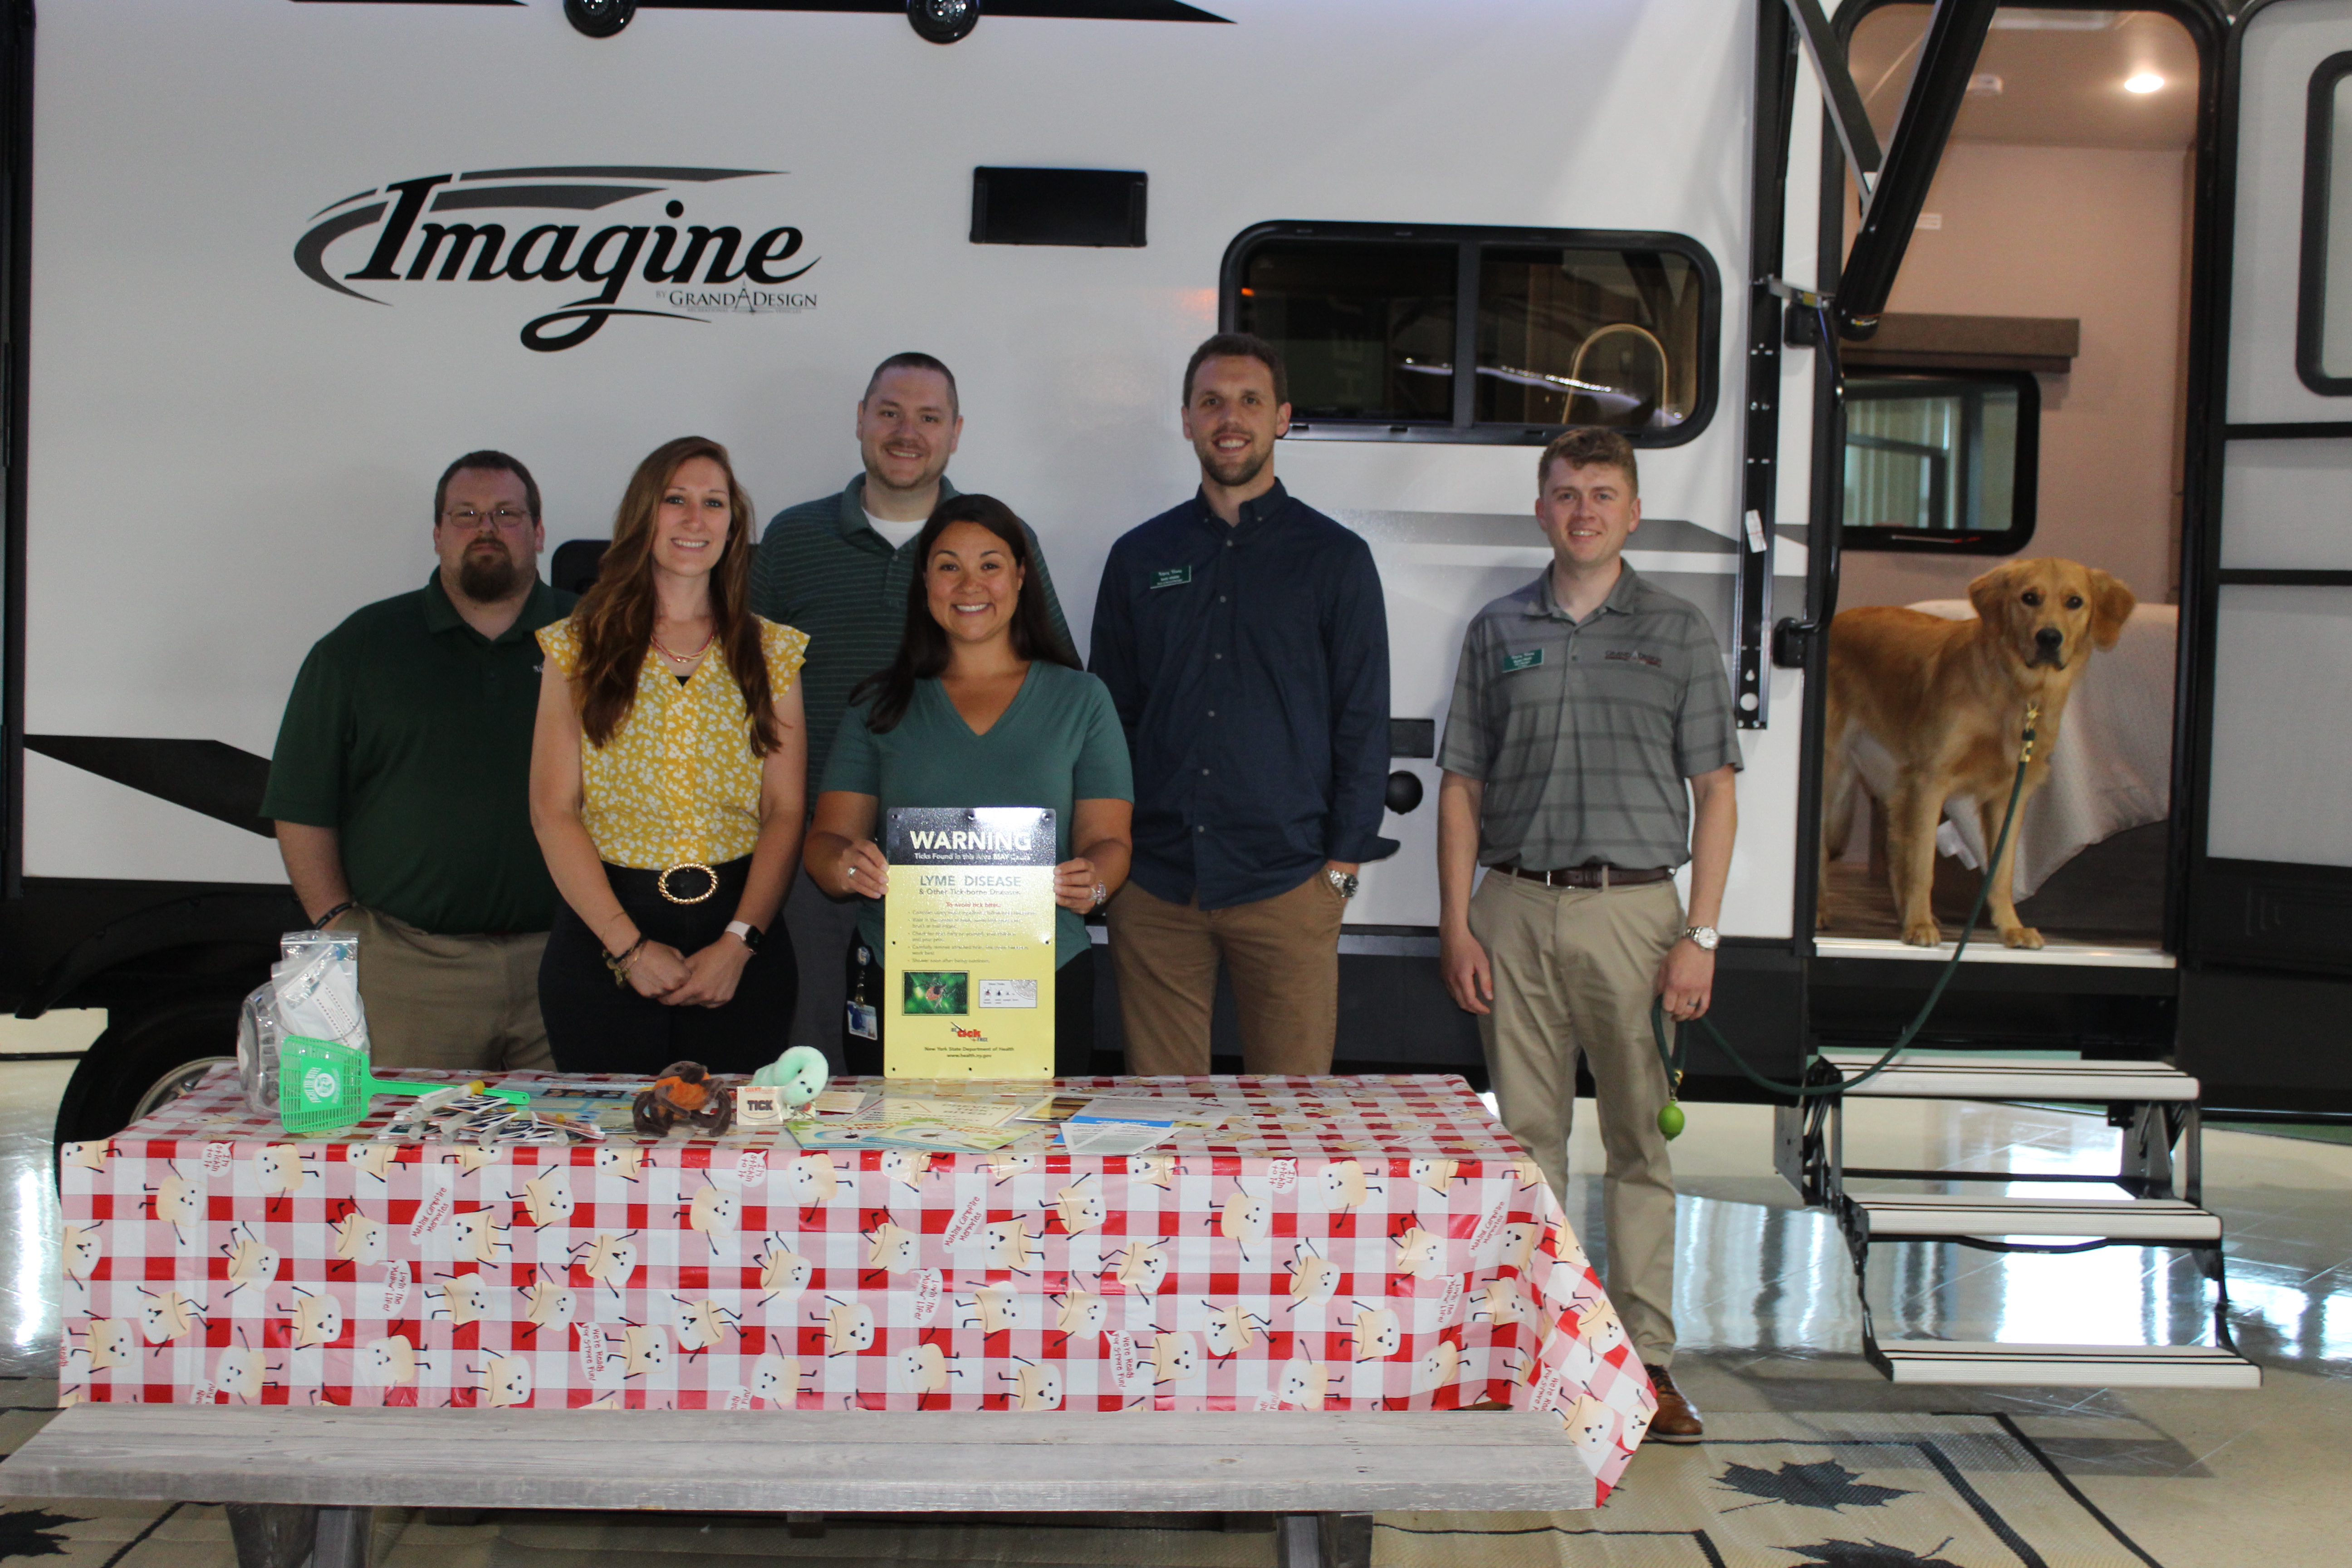 Staff from Montgomery County’s Public Health Department pictured
Friday with Alpin Haus employees after delivering tick kits and Lyme
disease information.